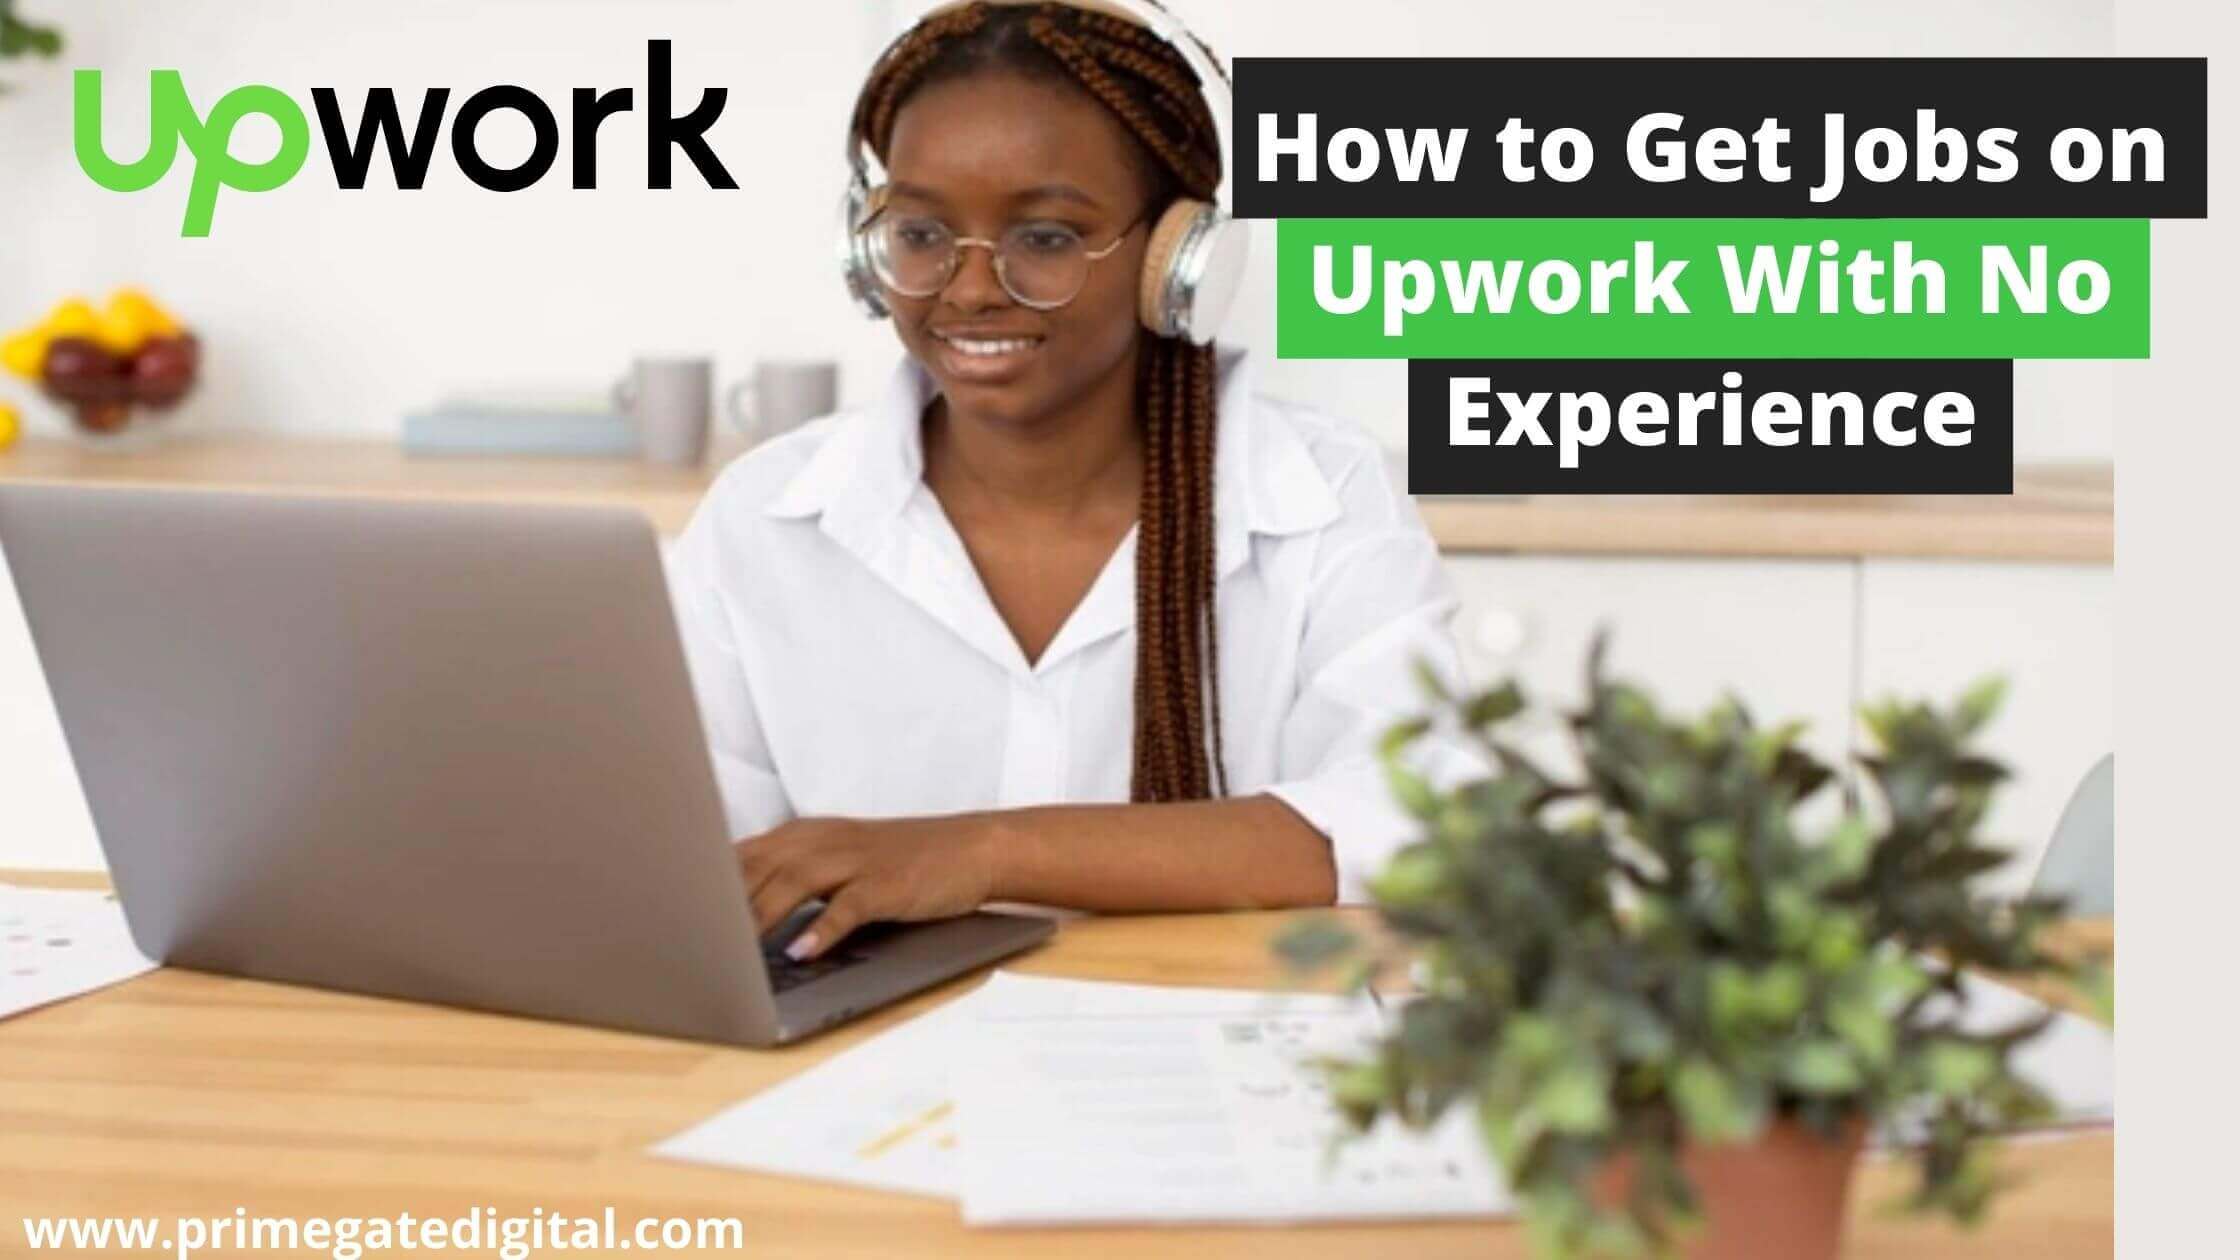 How to get jobs on Upwork with no experience